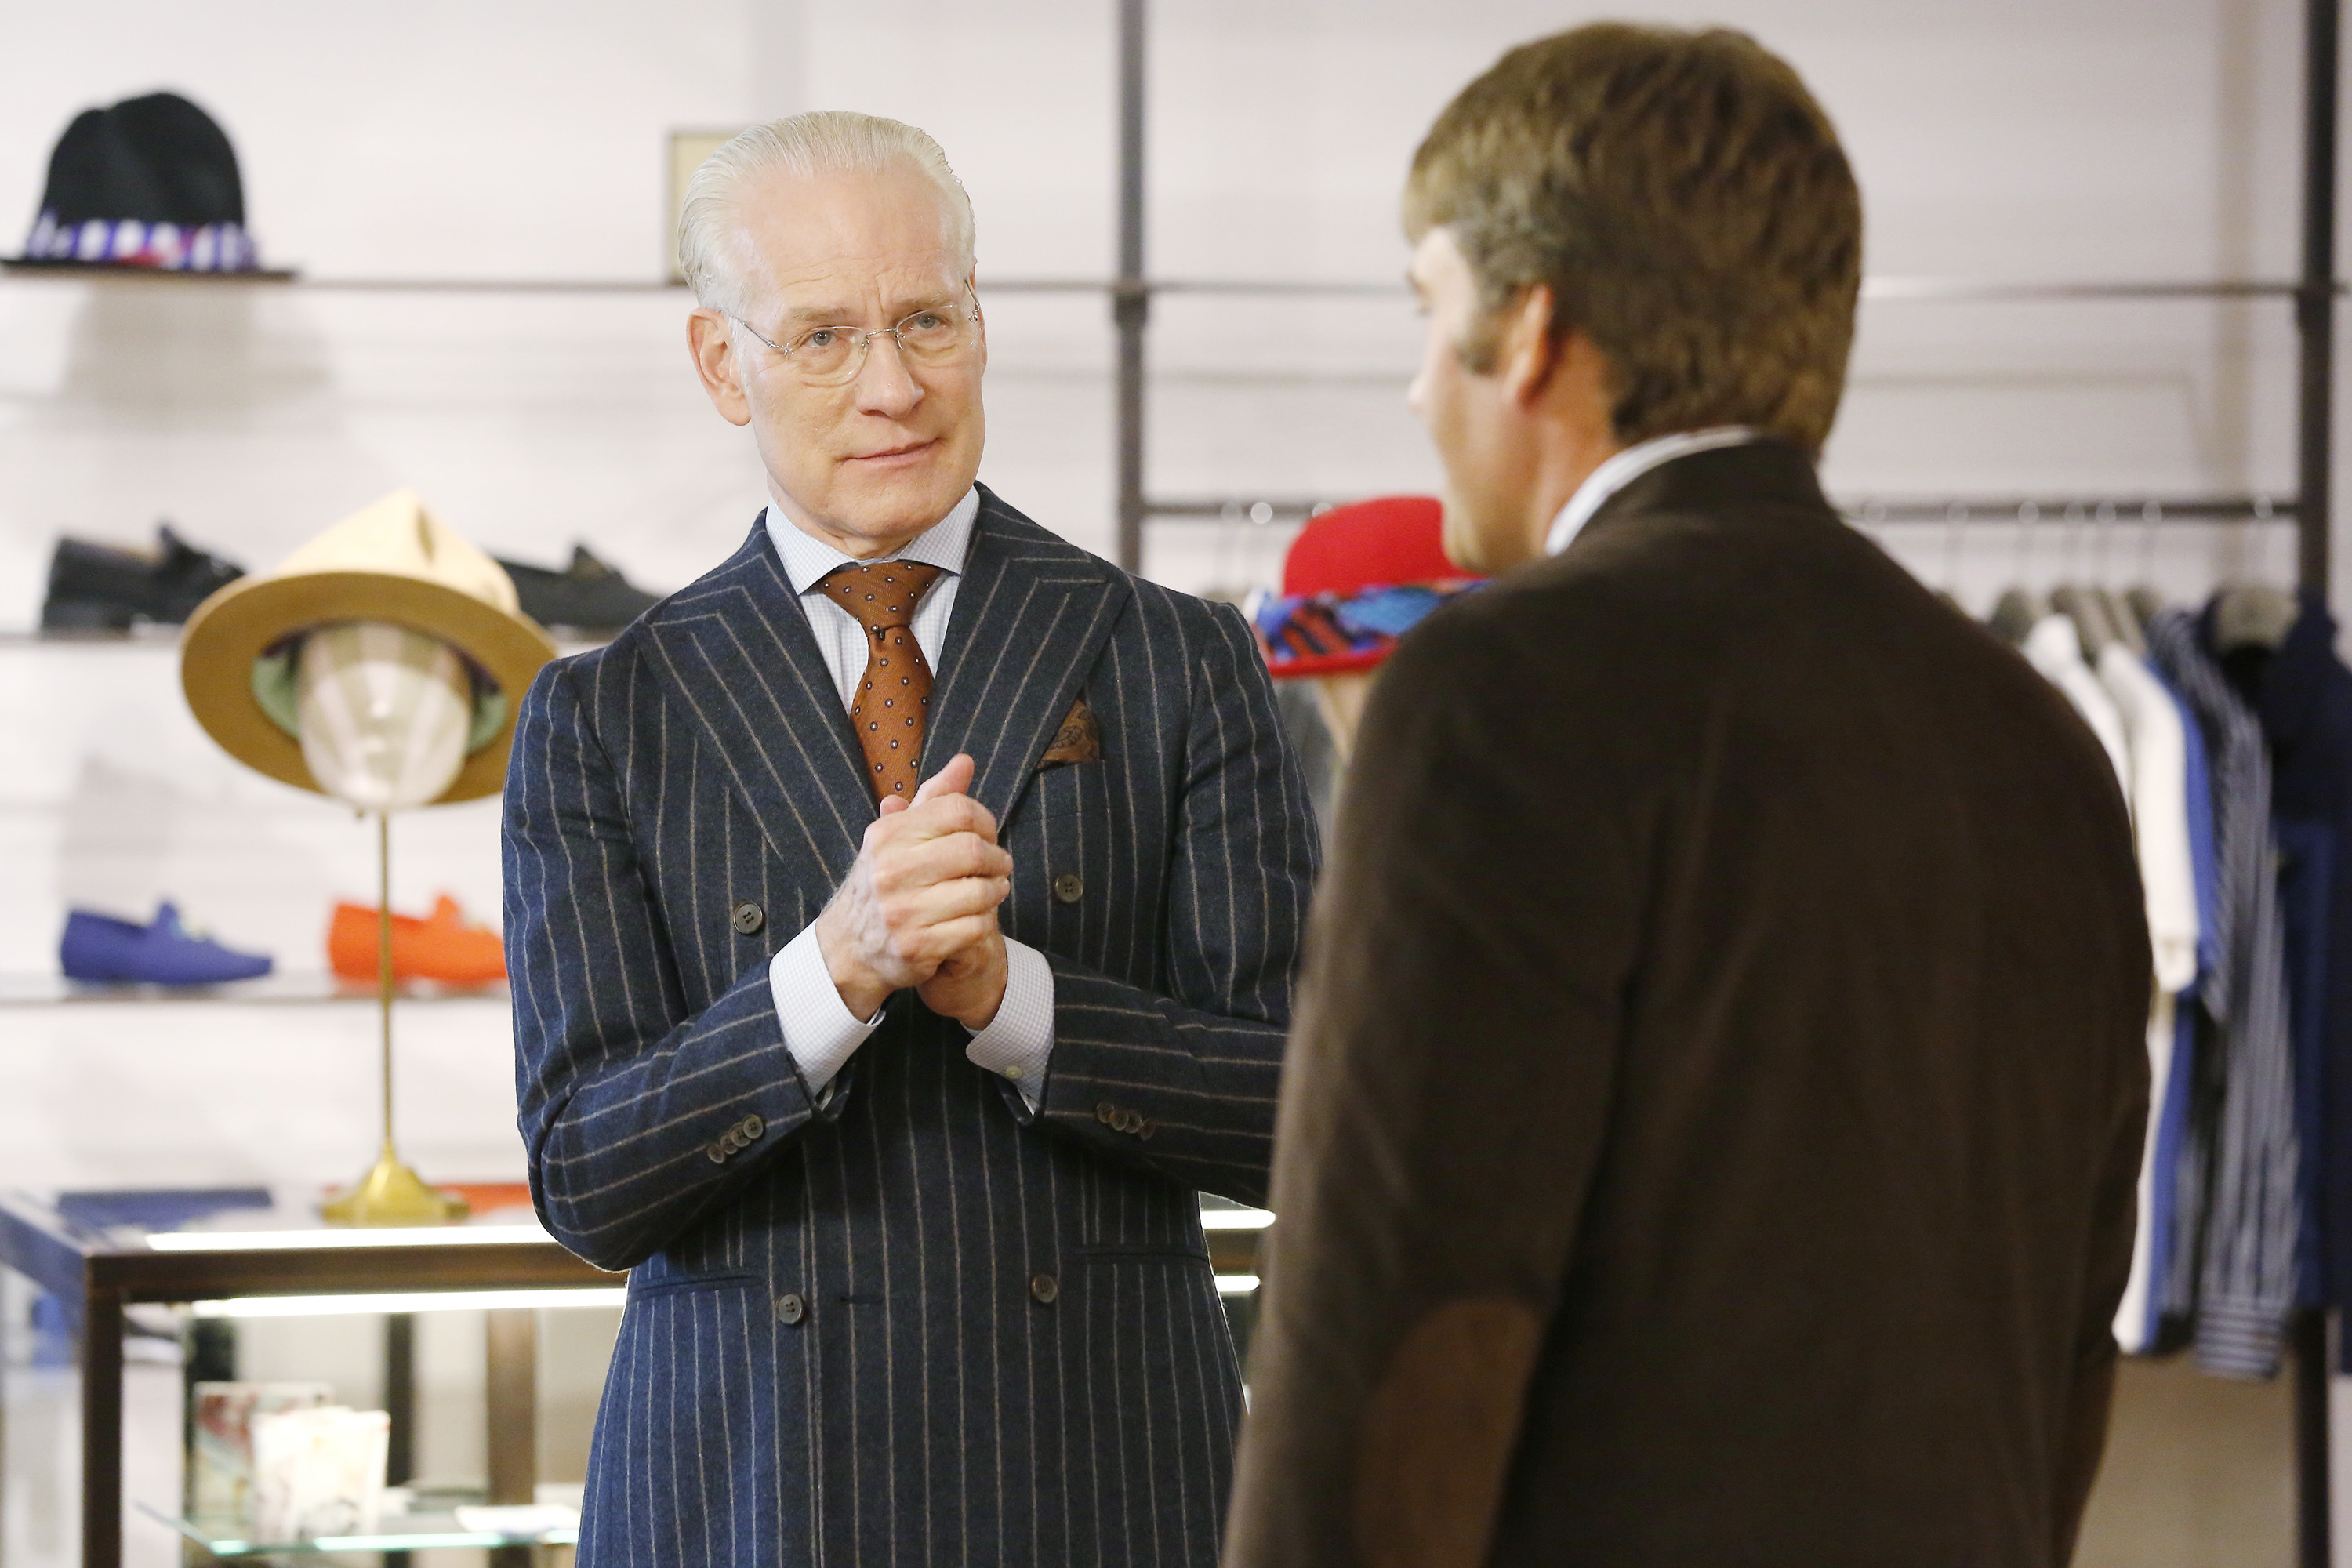 Tim Gunn on the "The Biggest Loser" season 17 in 2015 | Source: Getty Images